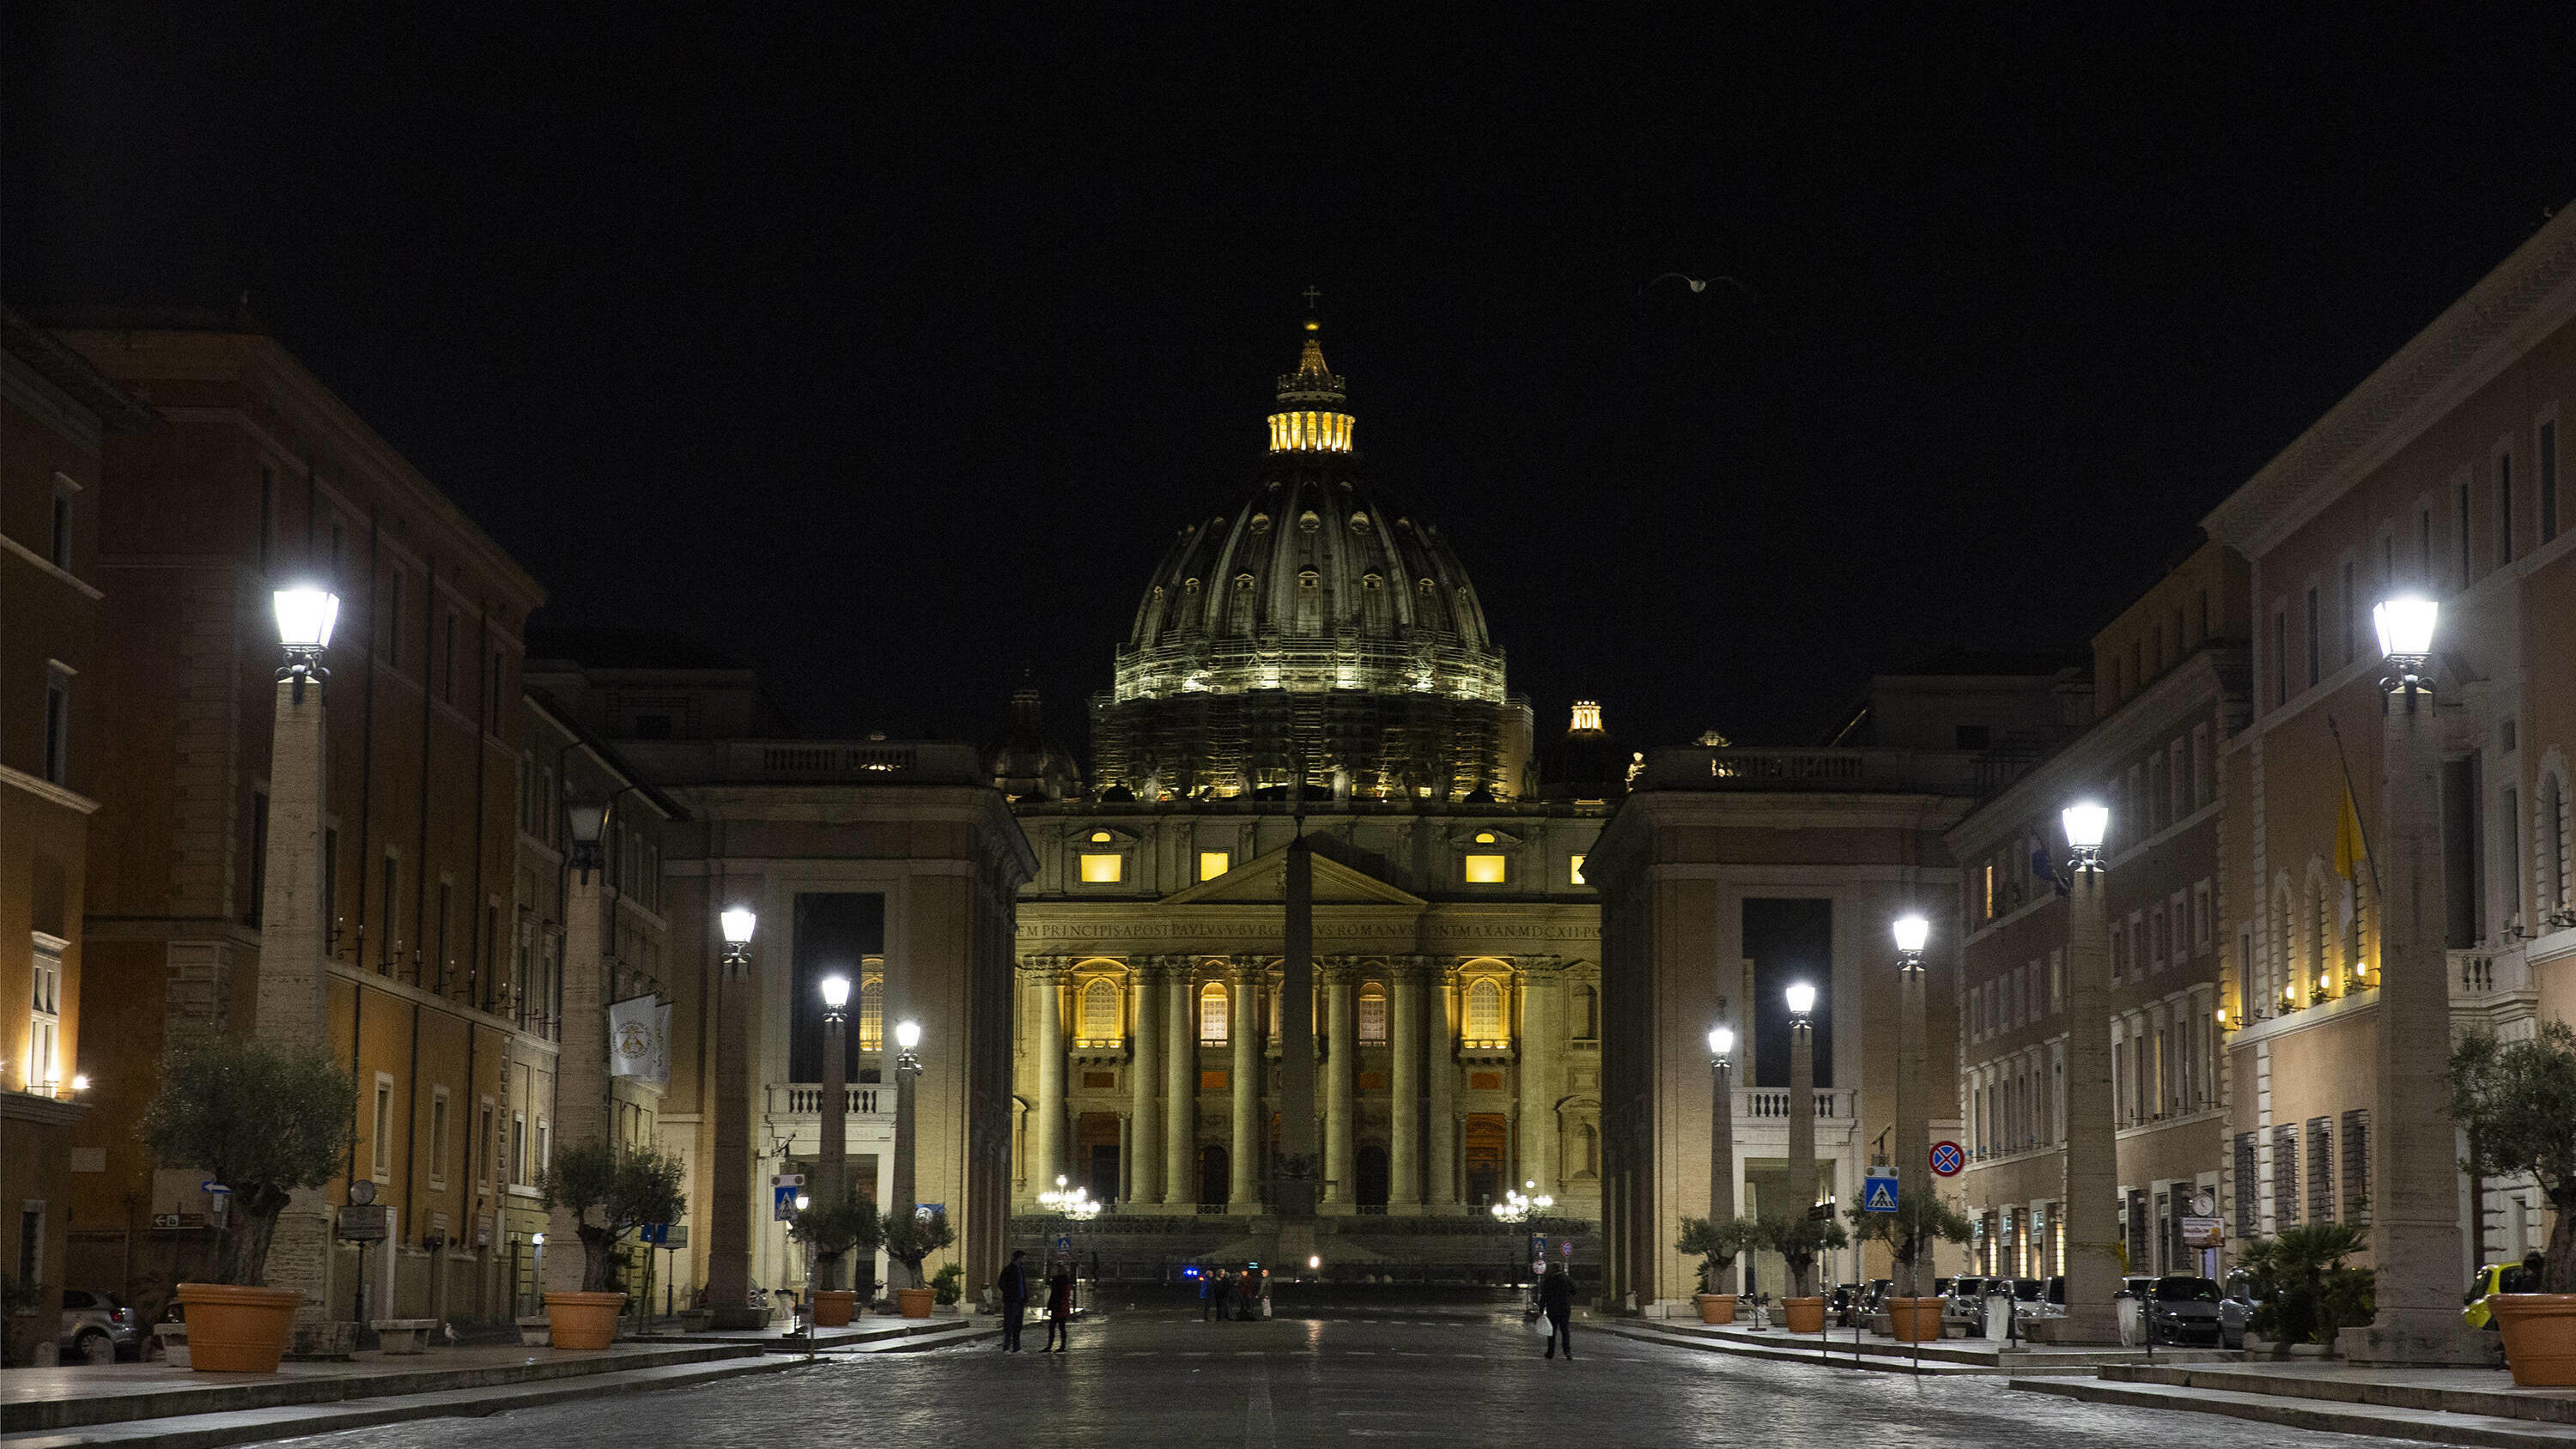  Italy in lockdown as coronavirus cases grows A view of Saint Peters Basilica from Via della Conciliazione in the evening before the entire nation of Italy has been placed in a red zone with restrictions like all public gatherings cancelled and all s